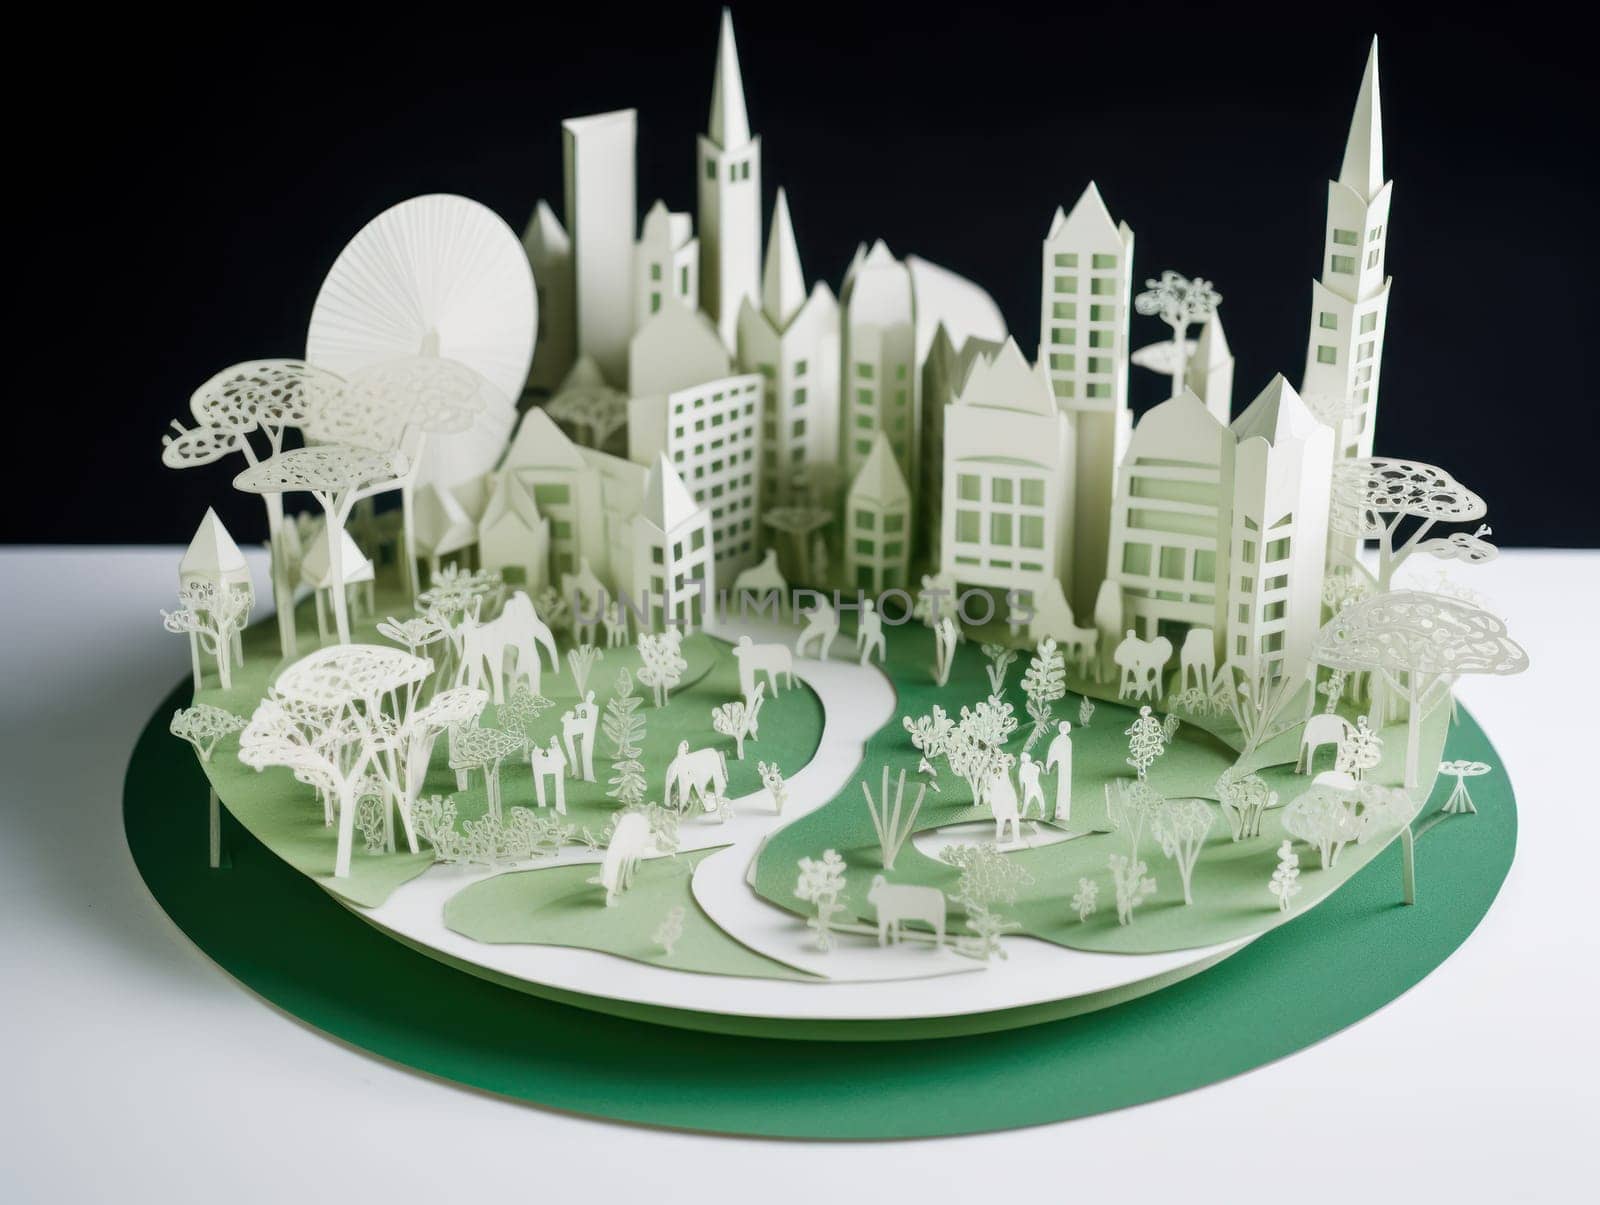 Green energy and sustainable concept, electric car and green city paper cut art. Generative AI.